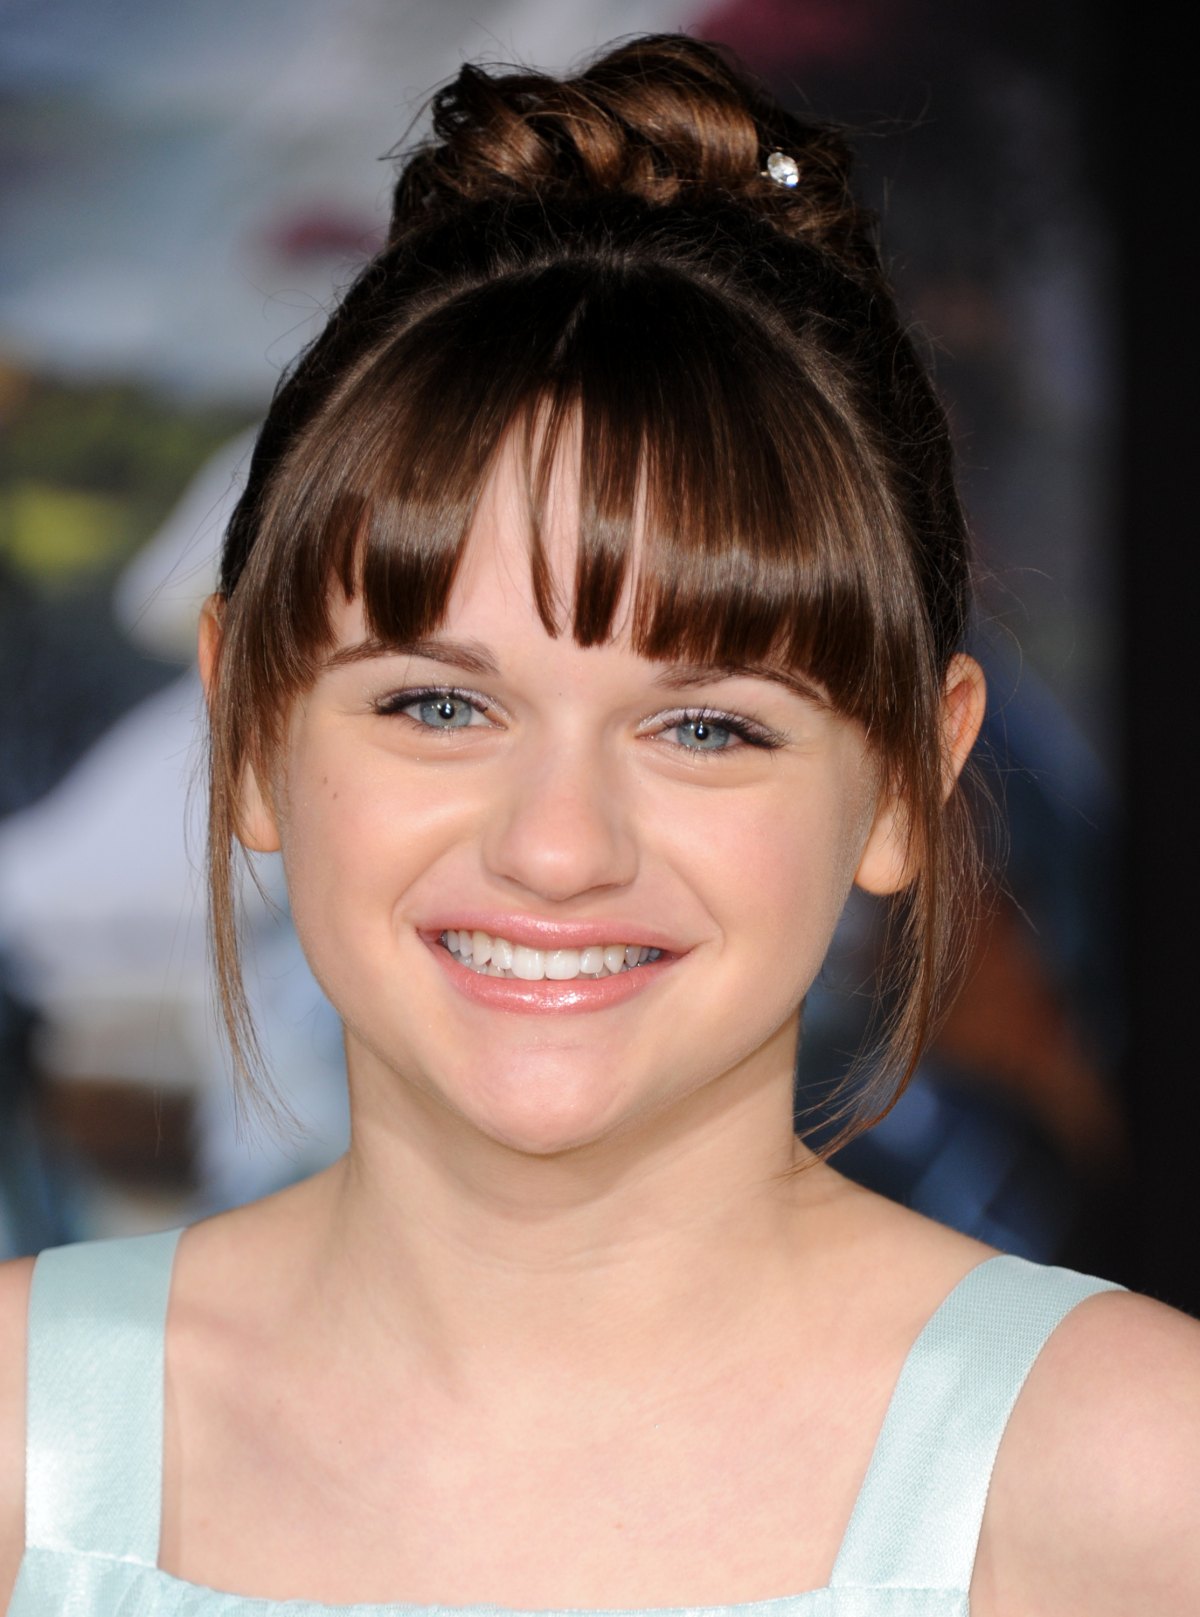 Joey King with Puppy Dog Wallpapers